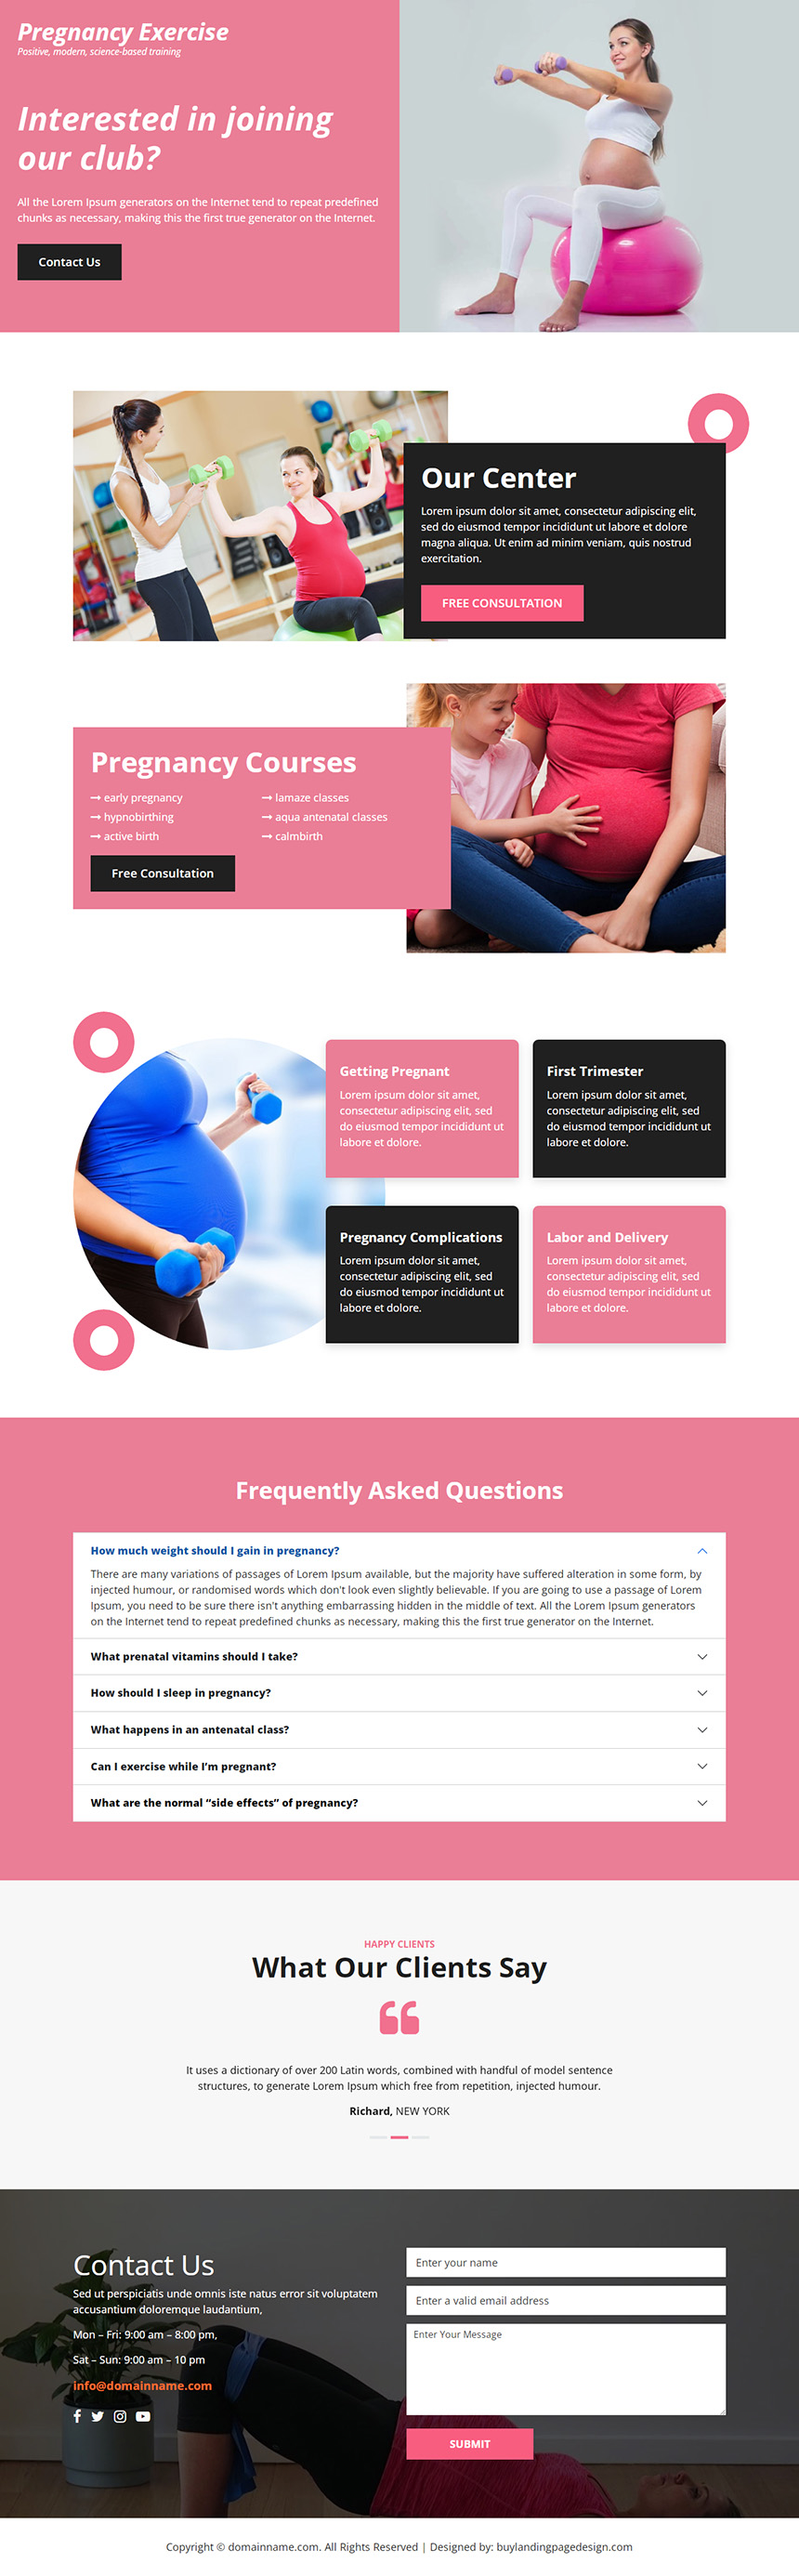 pregnancy exercise free consultation responsive landing page